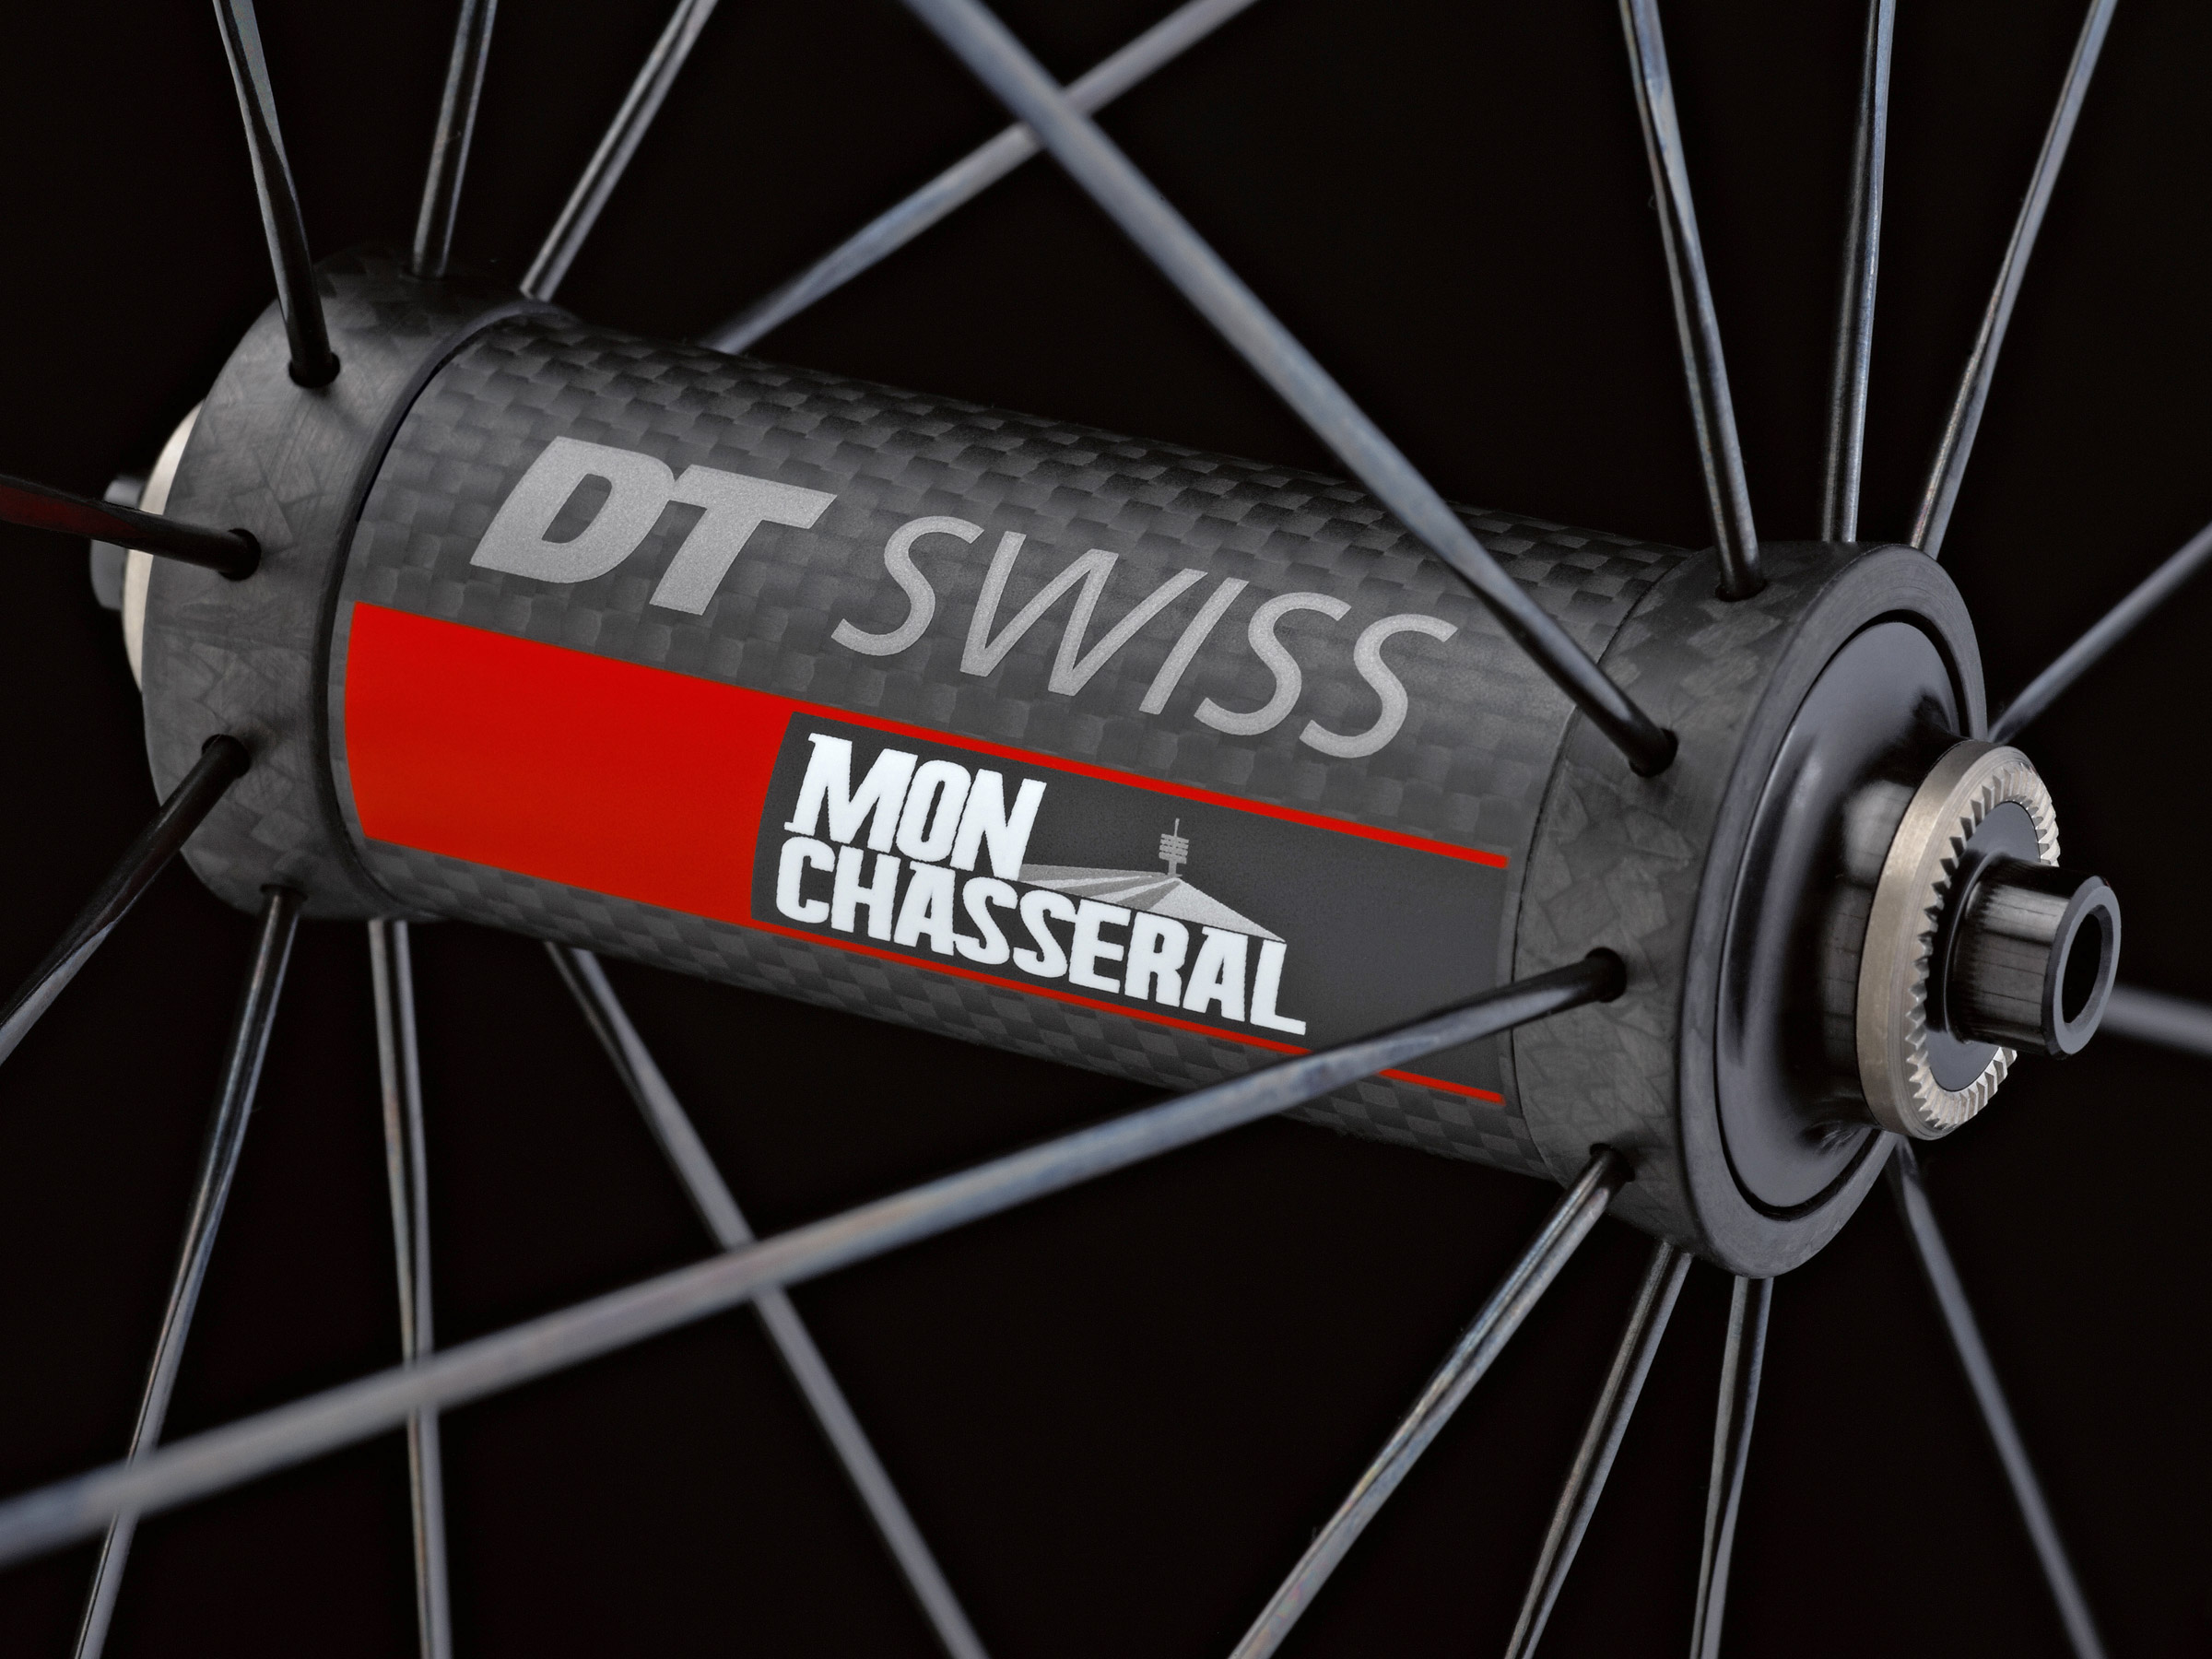 DT Swiss expands premium Mon Chasseral road lineup to include RC38s